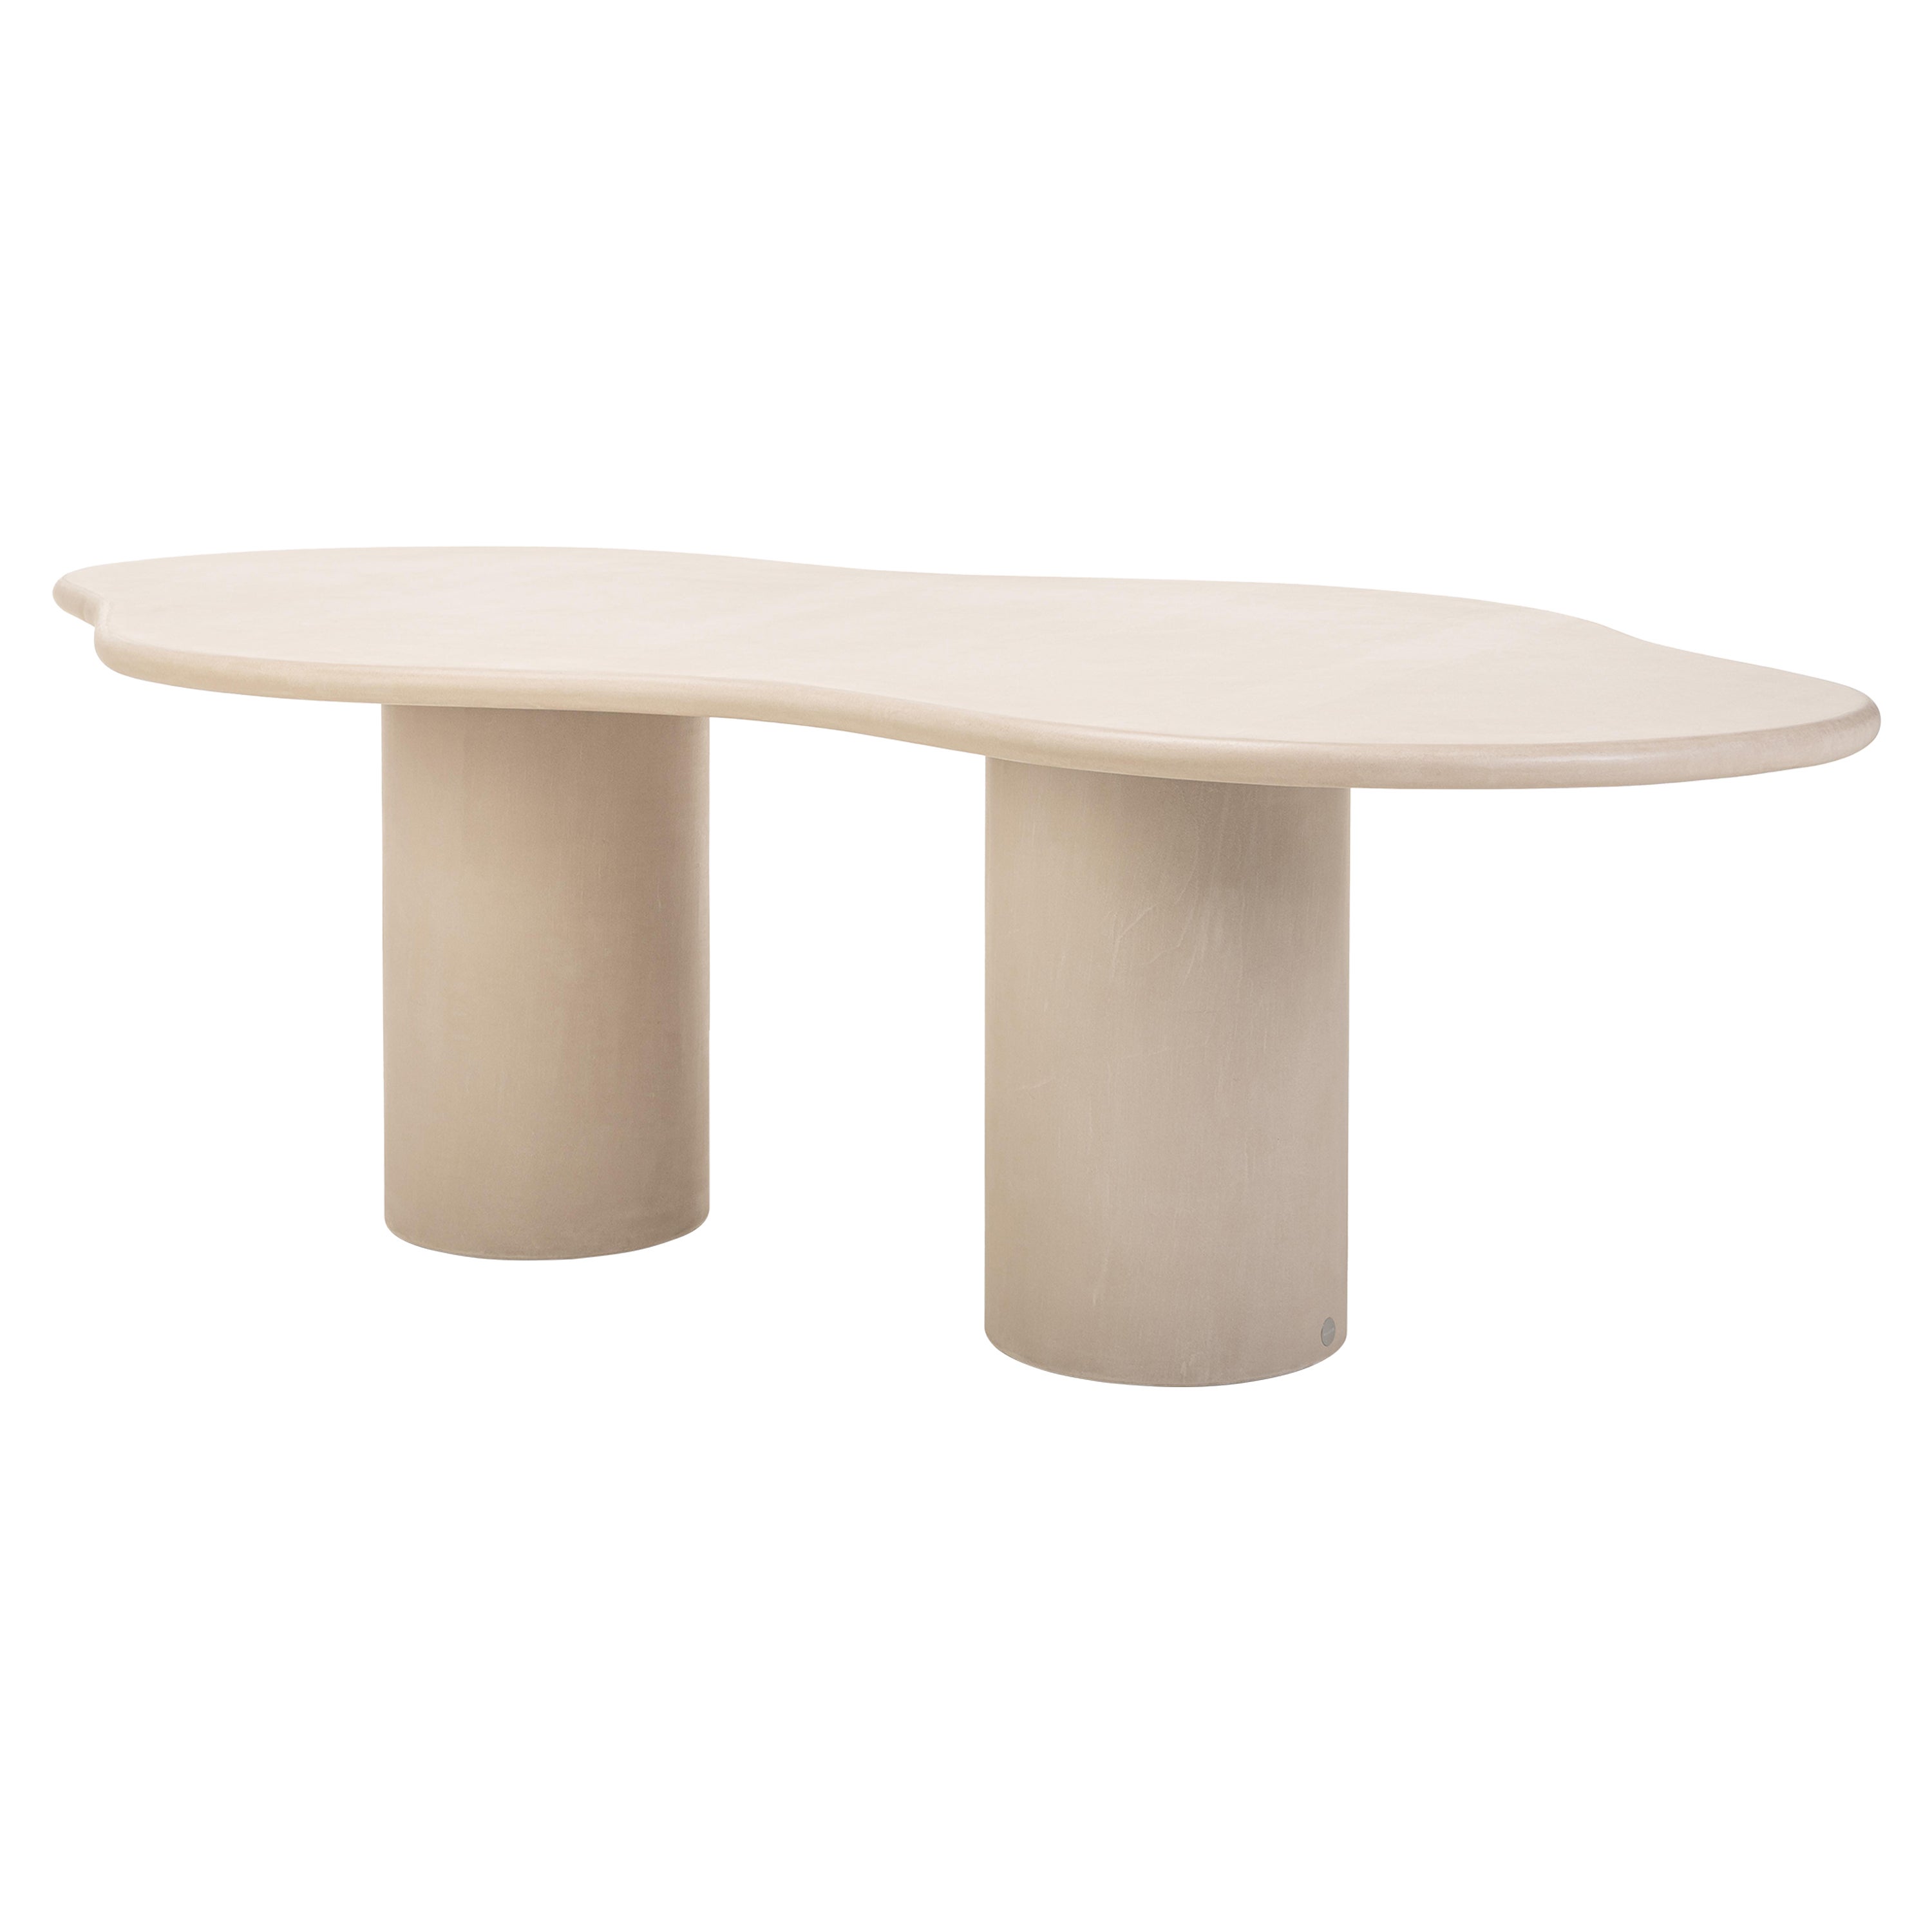 Natural Plaster Dining Table "Fluent" 260 by Isabelle Beaumont